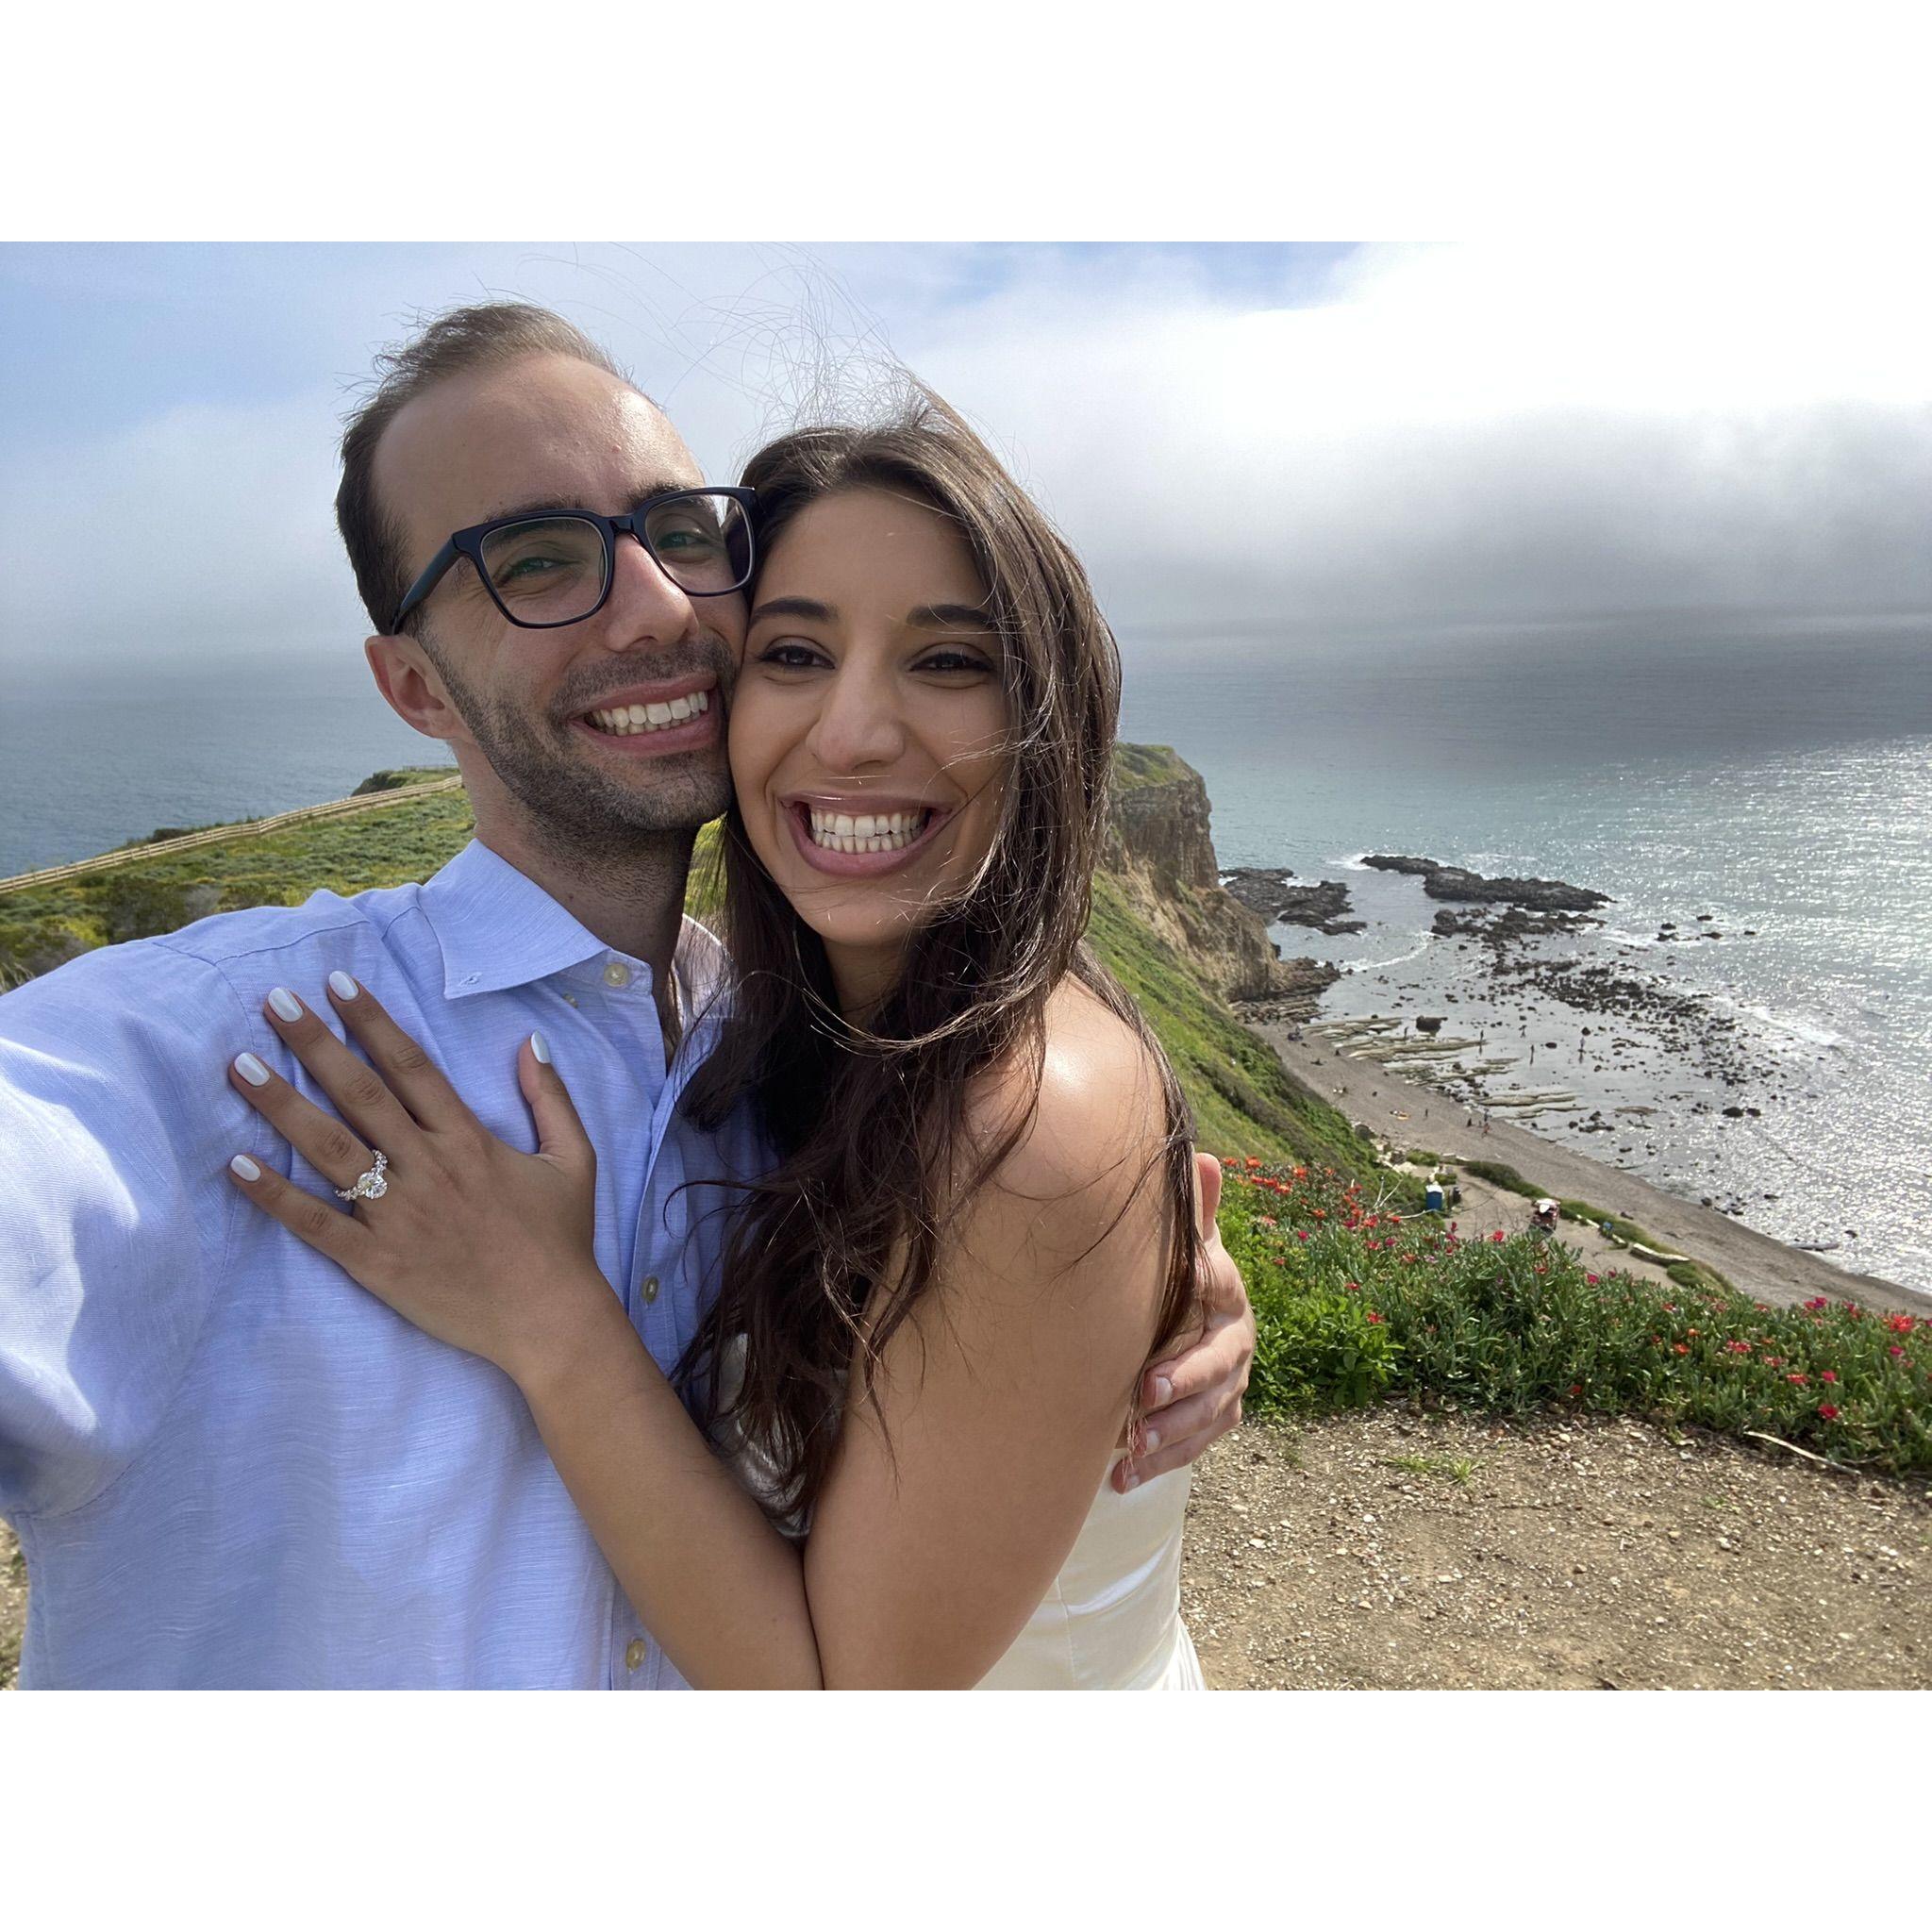 Our first post-proposal selfie!